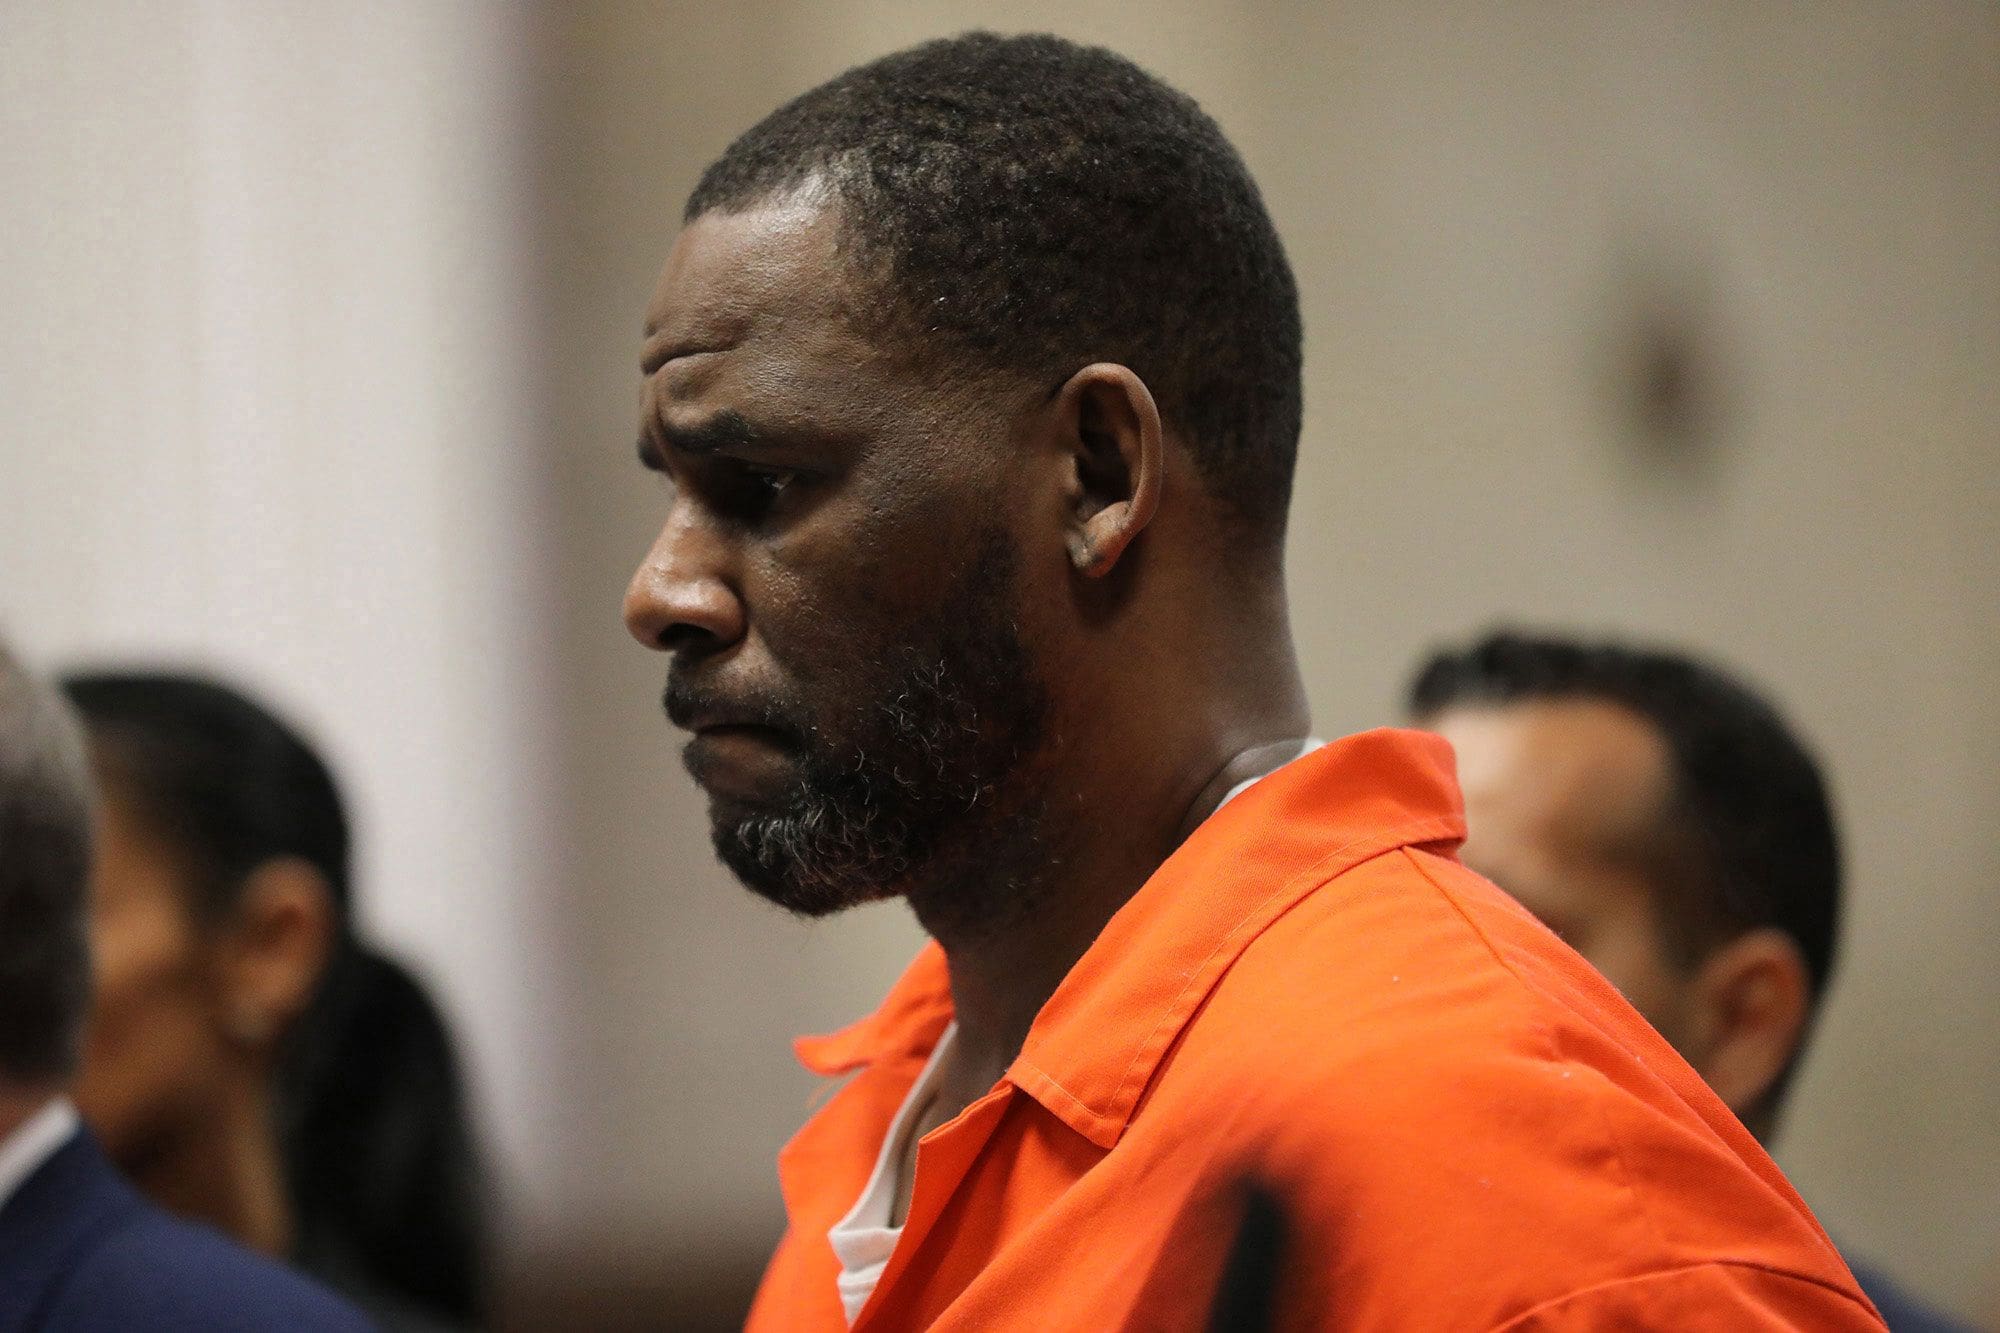 federal-prosecutors-seek-to-present-new-evidence-in-court-about-r-kelly